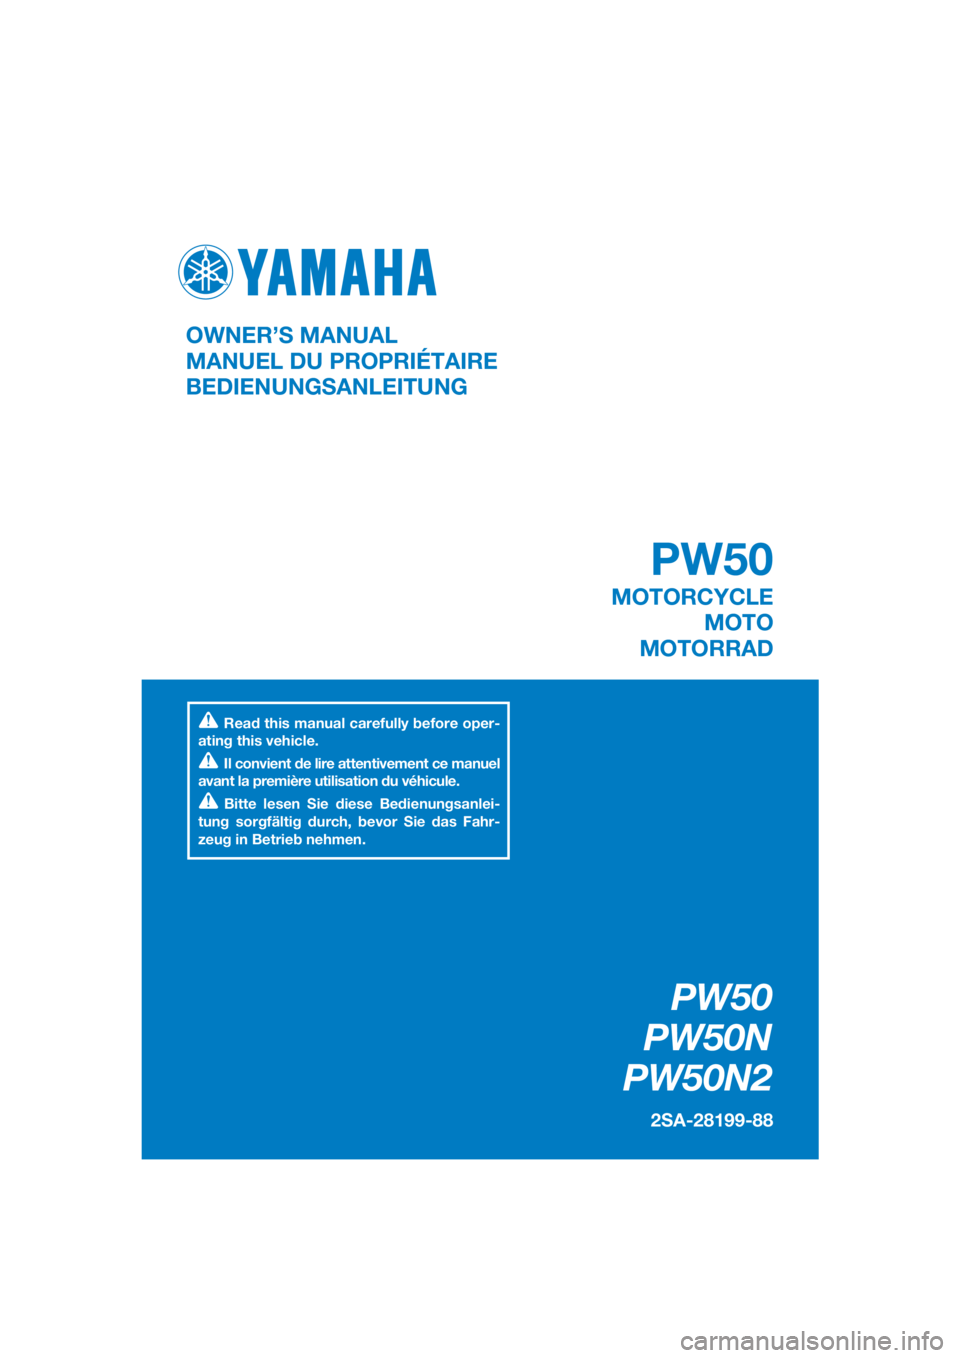 YAMAHA PW50 2022  Owners Manual DIC183
PW50
PW50N
PW50N2
2SA-28199-88
OWNER’S MANUAL
MANUEL DU PROPRIÉTAIRE
BEDIENUNGSANLEITUNG
Read this manual carefully before oper-
ating this vehicle.
Il convient de lire attentivement ce manu